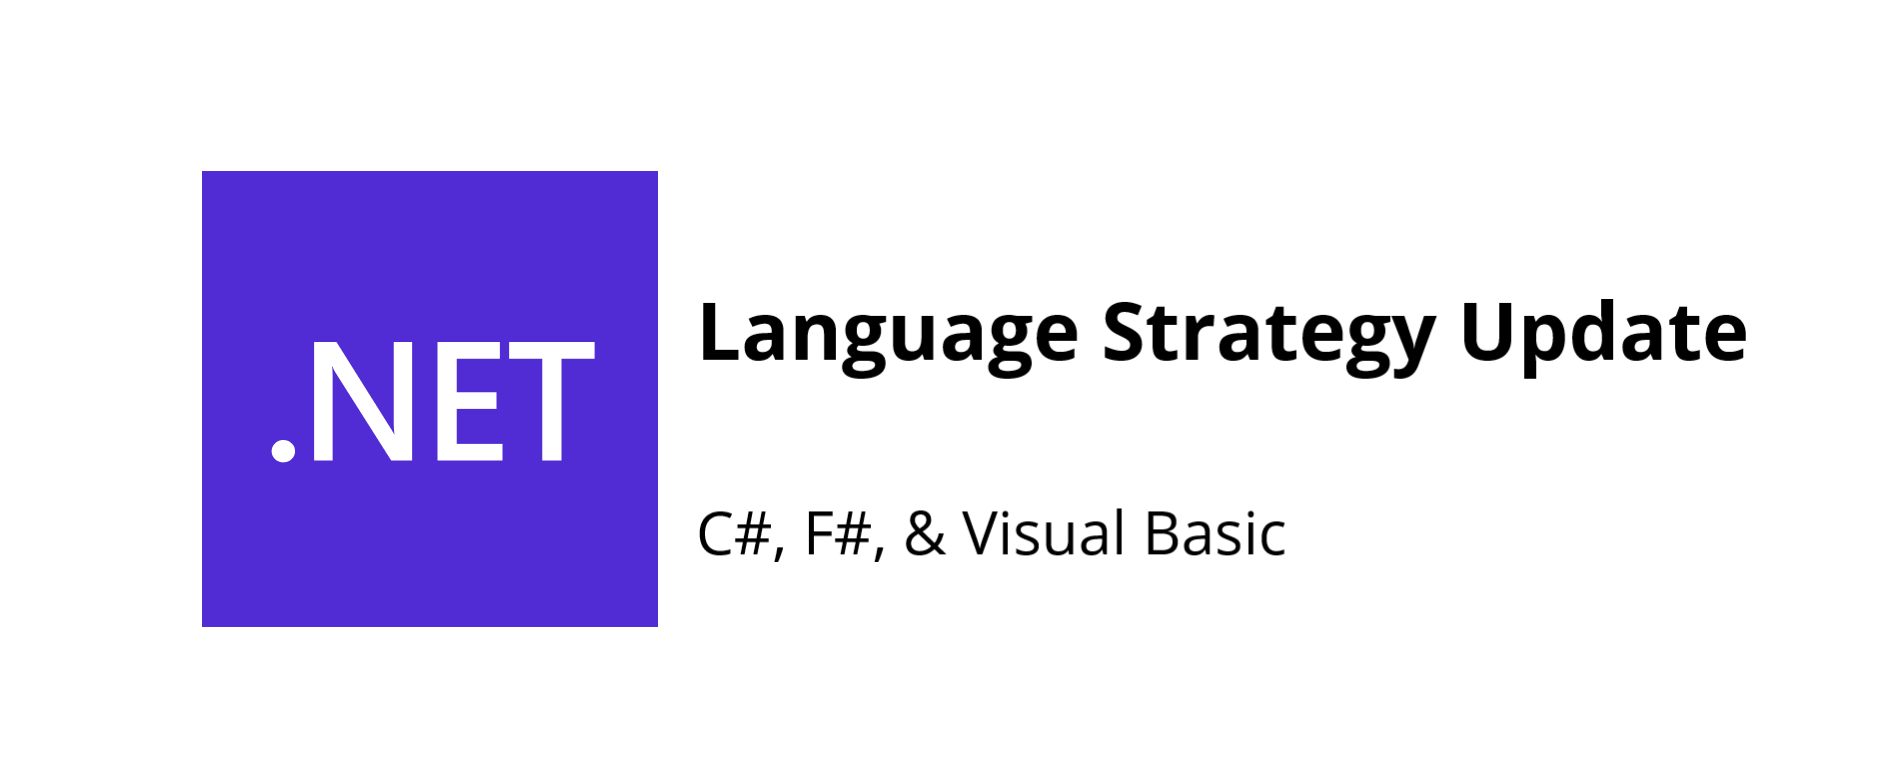 Update to the .NET language strategy